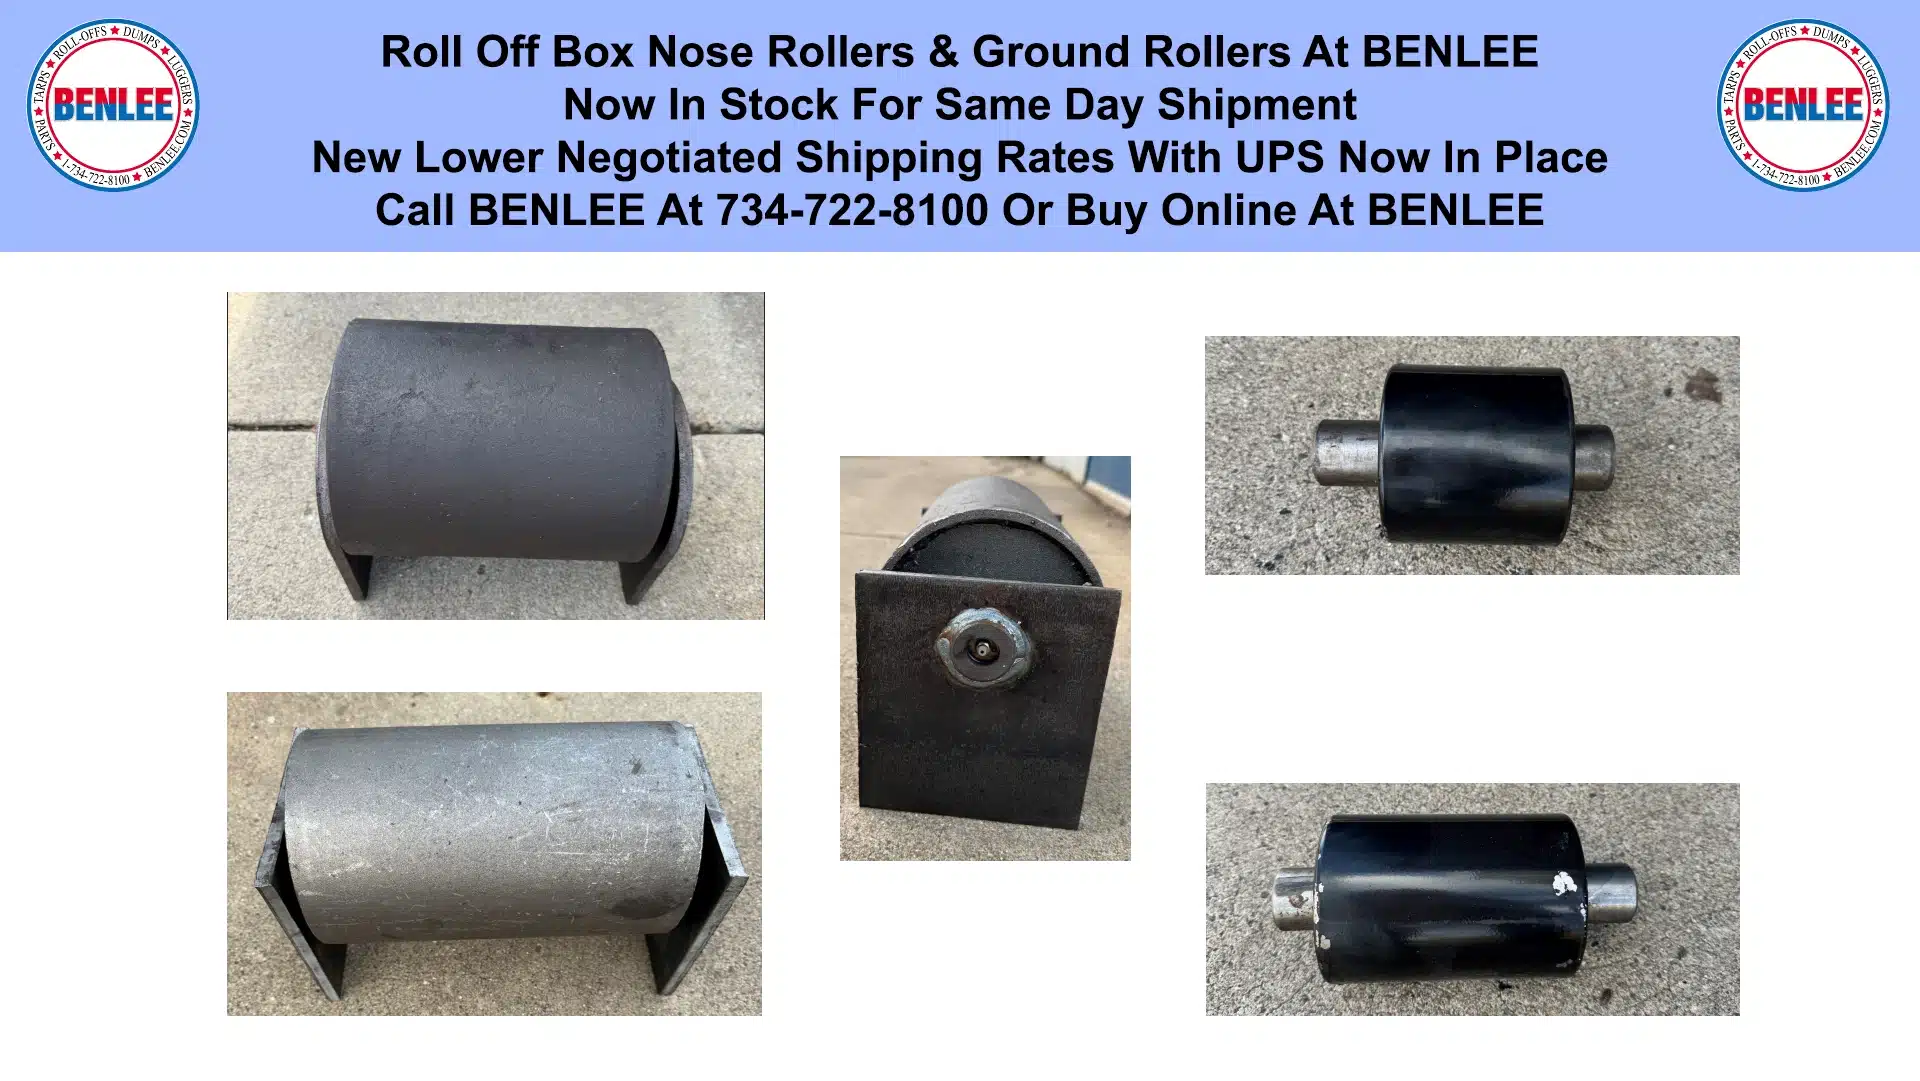 Ground and Nose Rollers